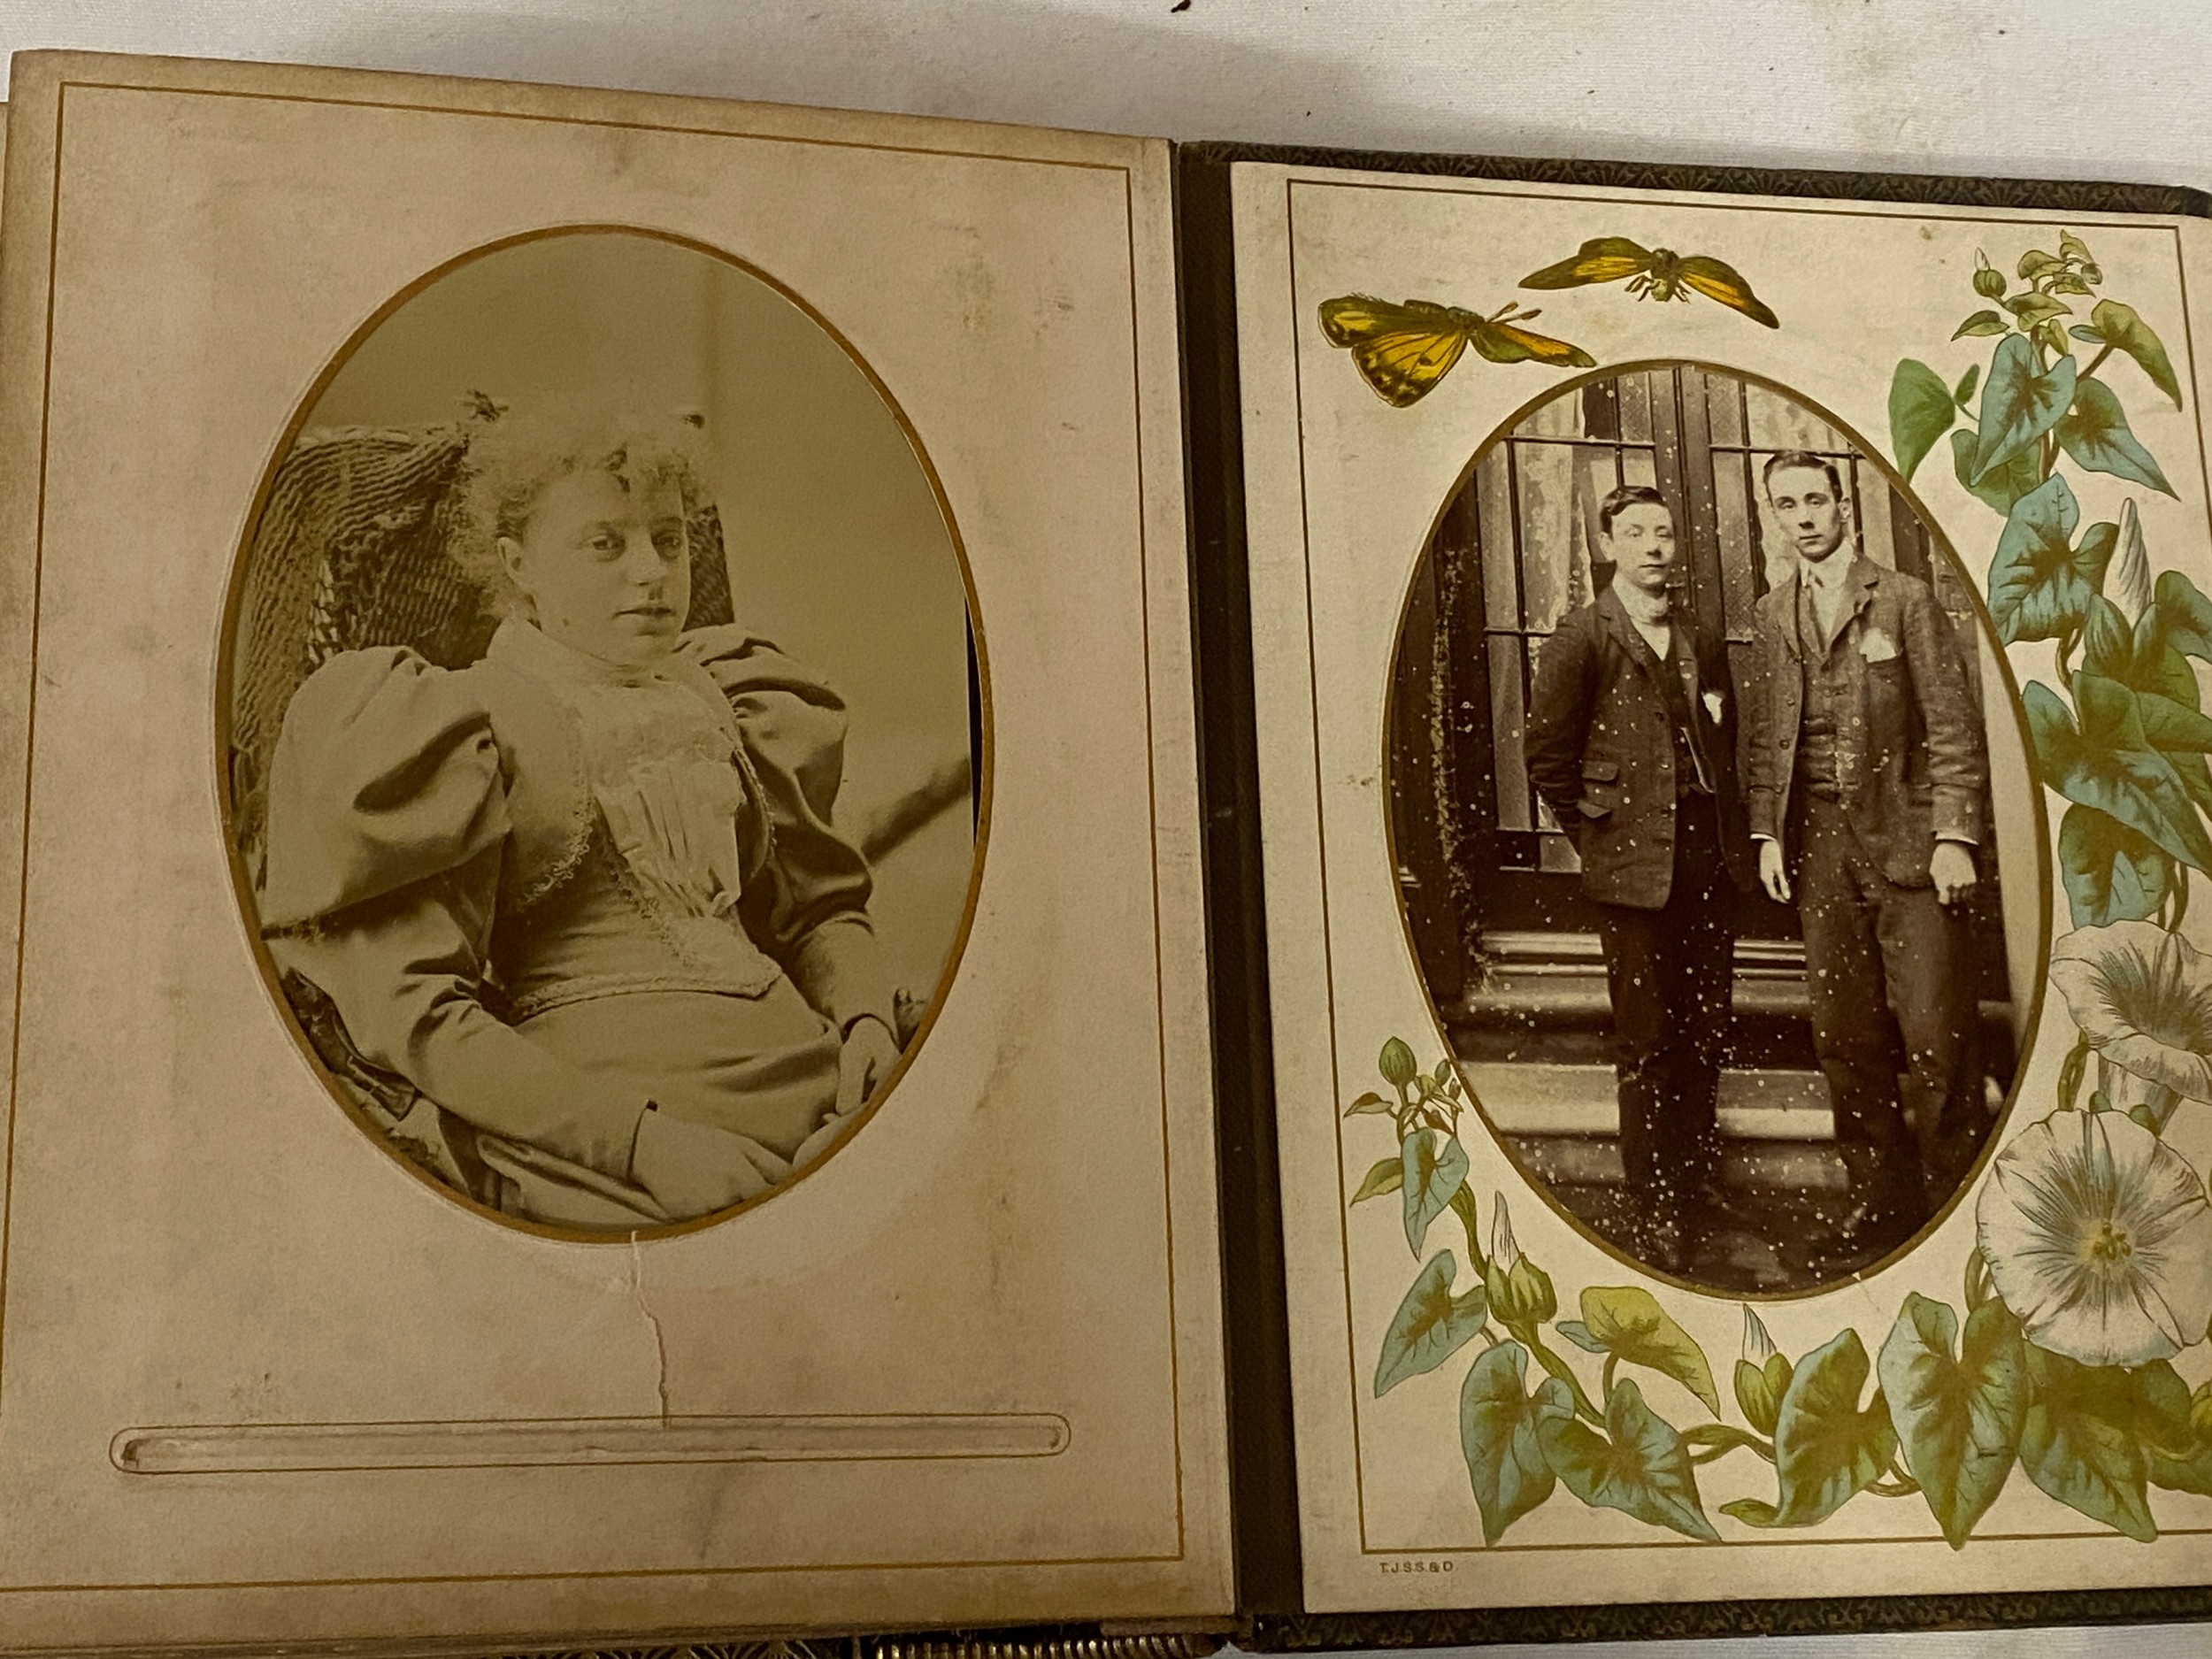 Photograph albums; Saltley College X'mas 1887 presented to Thomas Withers by his fellow students - Image 28 of 30